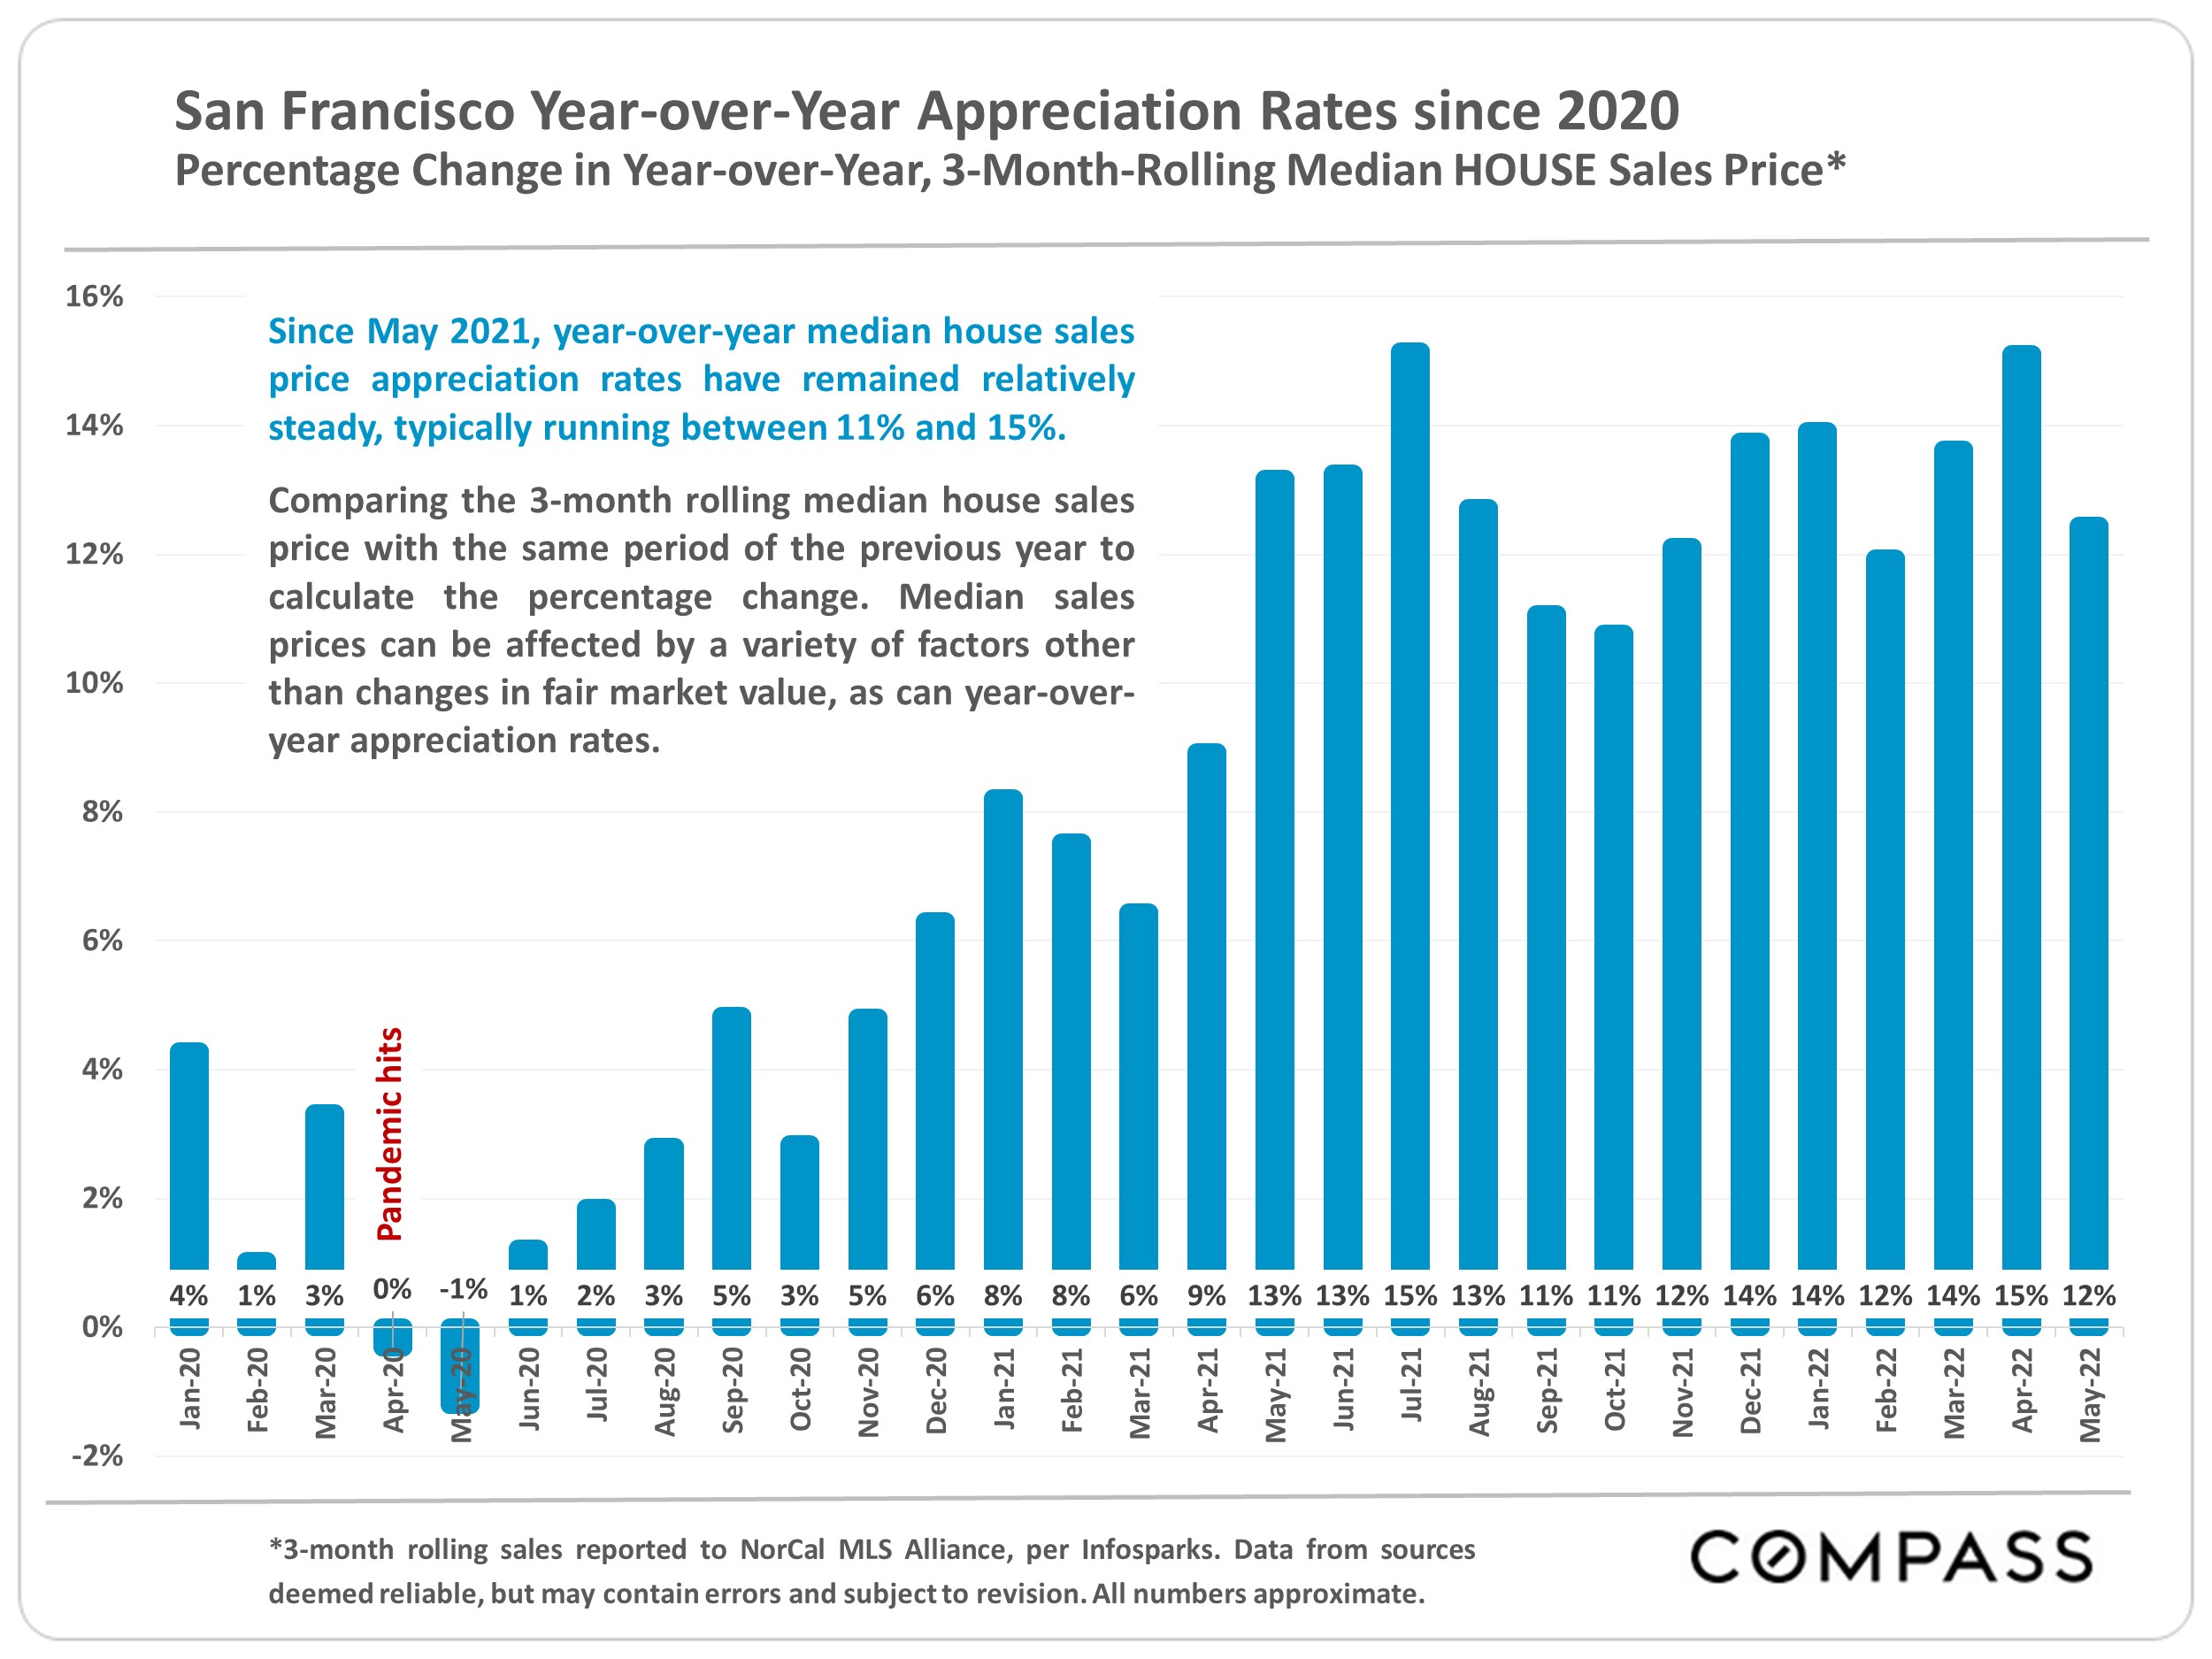 Graph showing SF year-over-year appreciation rate since 2020